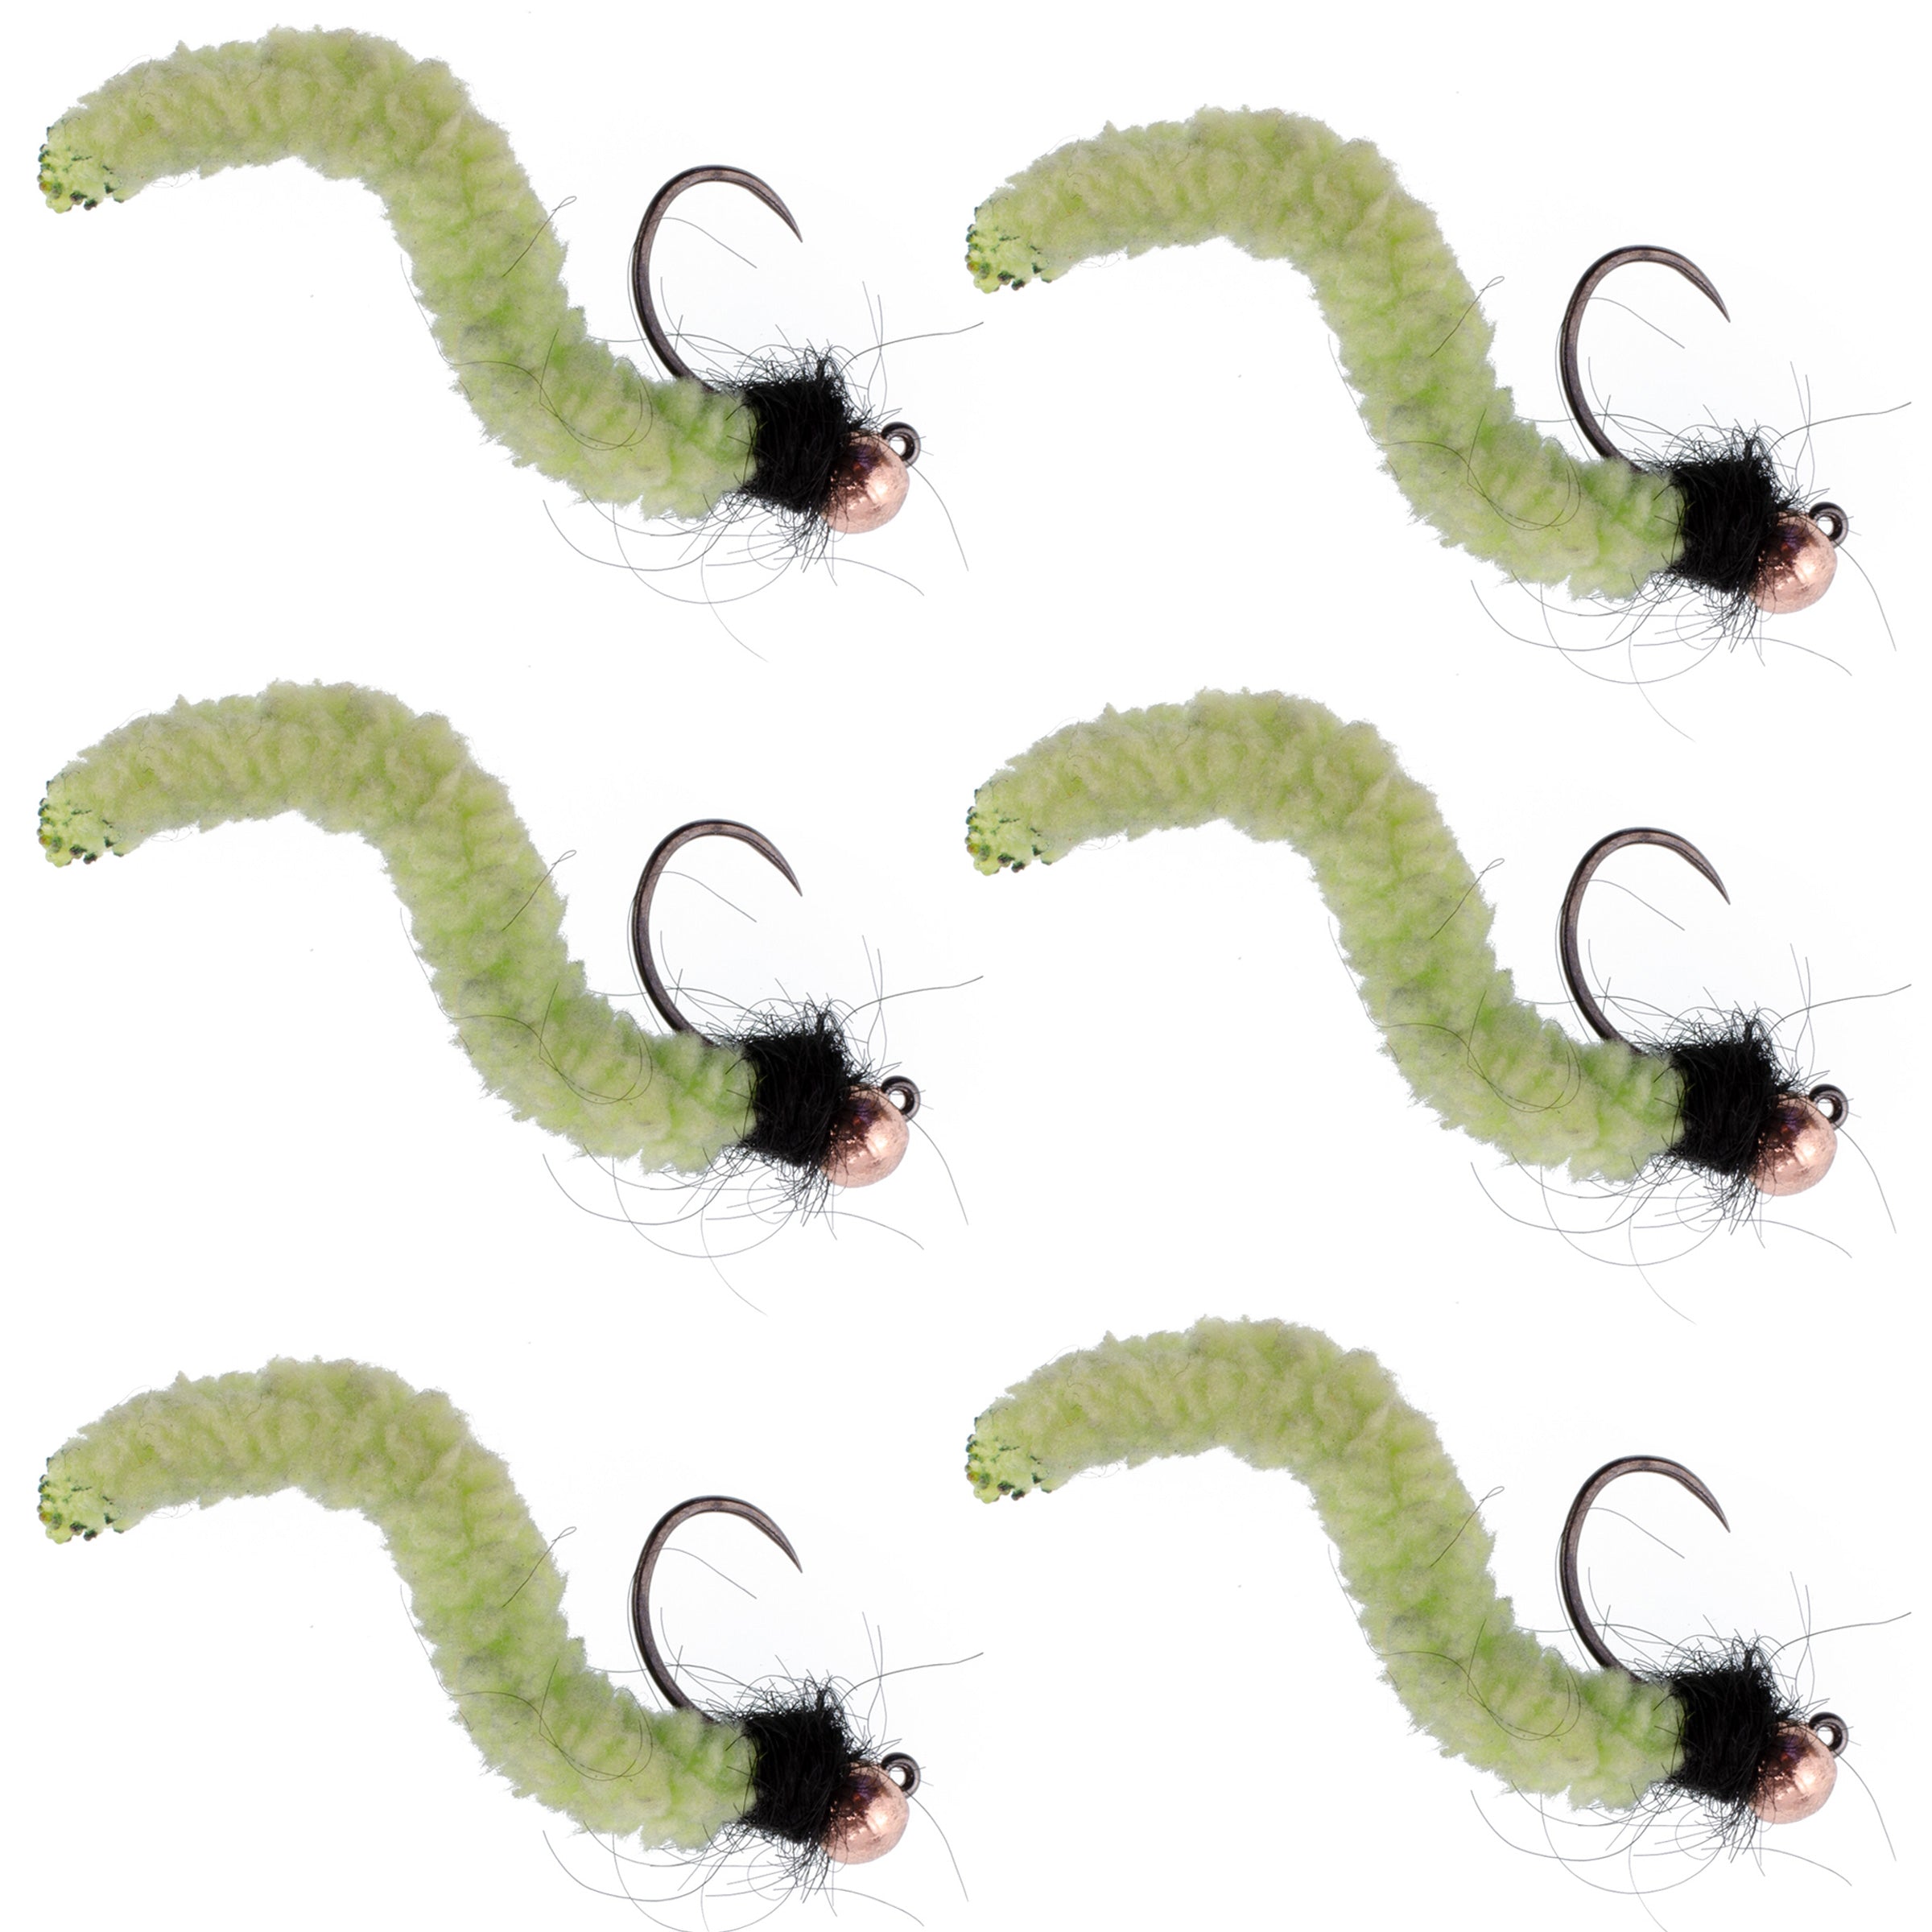 Tungsten Bead Chartreuse Wormy Mop Fly Tactical Jig Czech Euro Nymph Barbless Nymphing Fly - 6 Flies Size 12